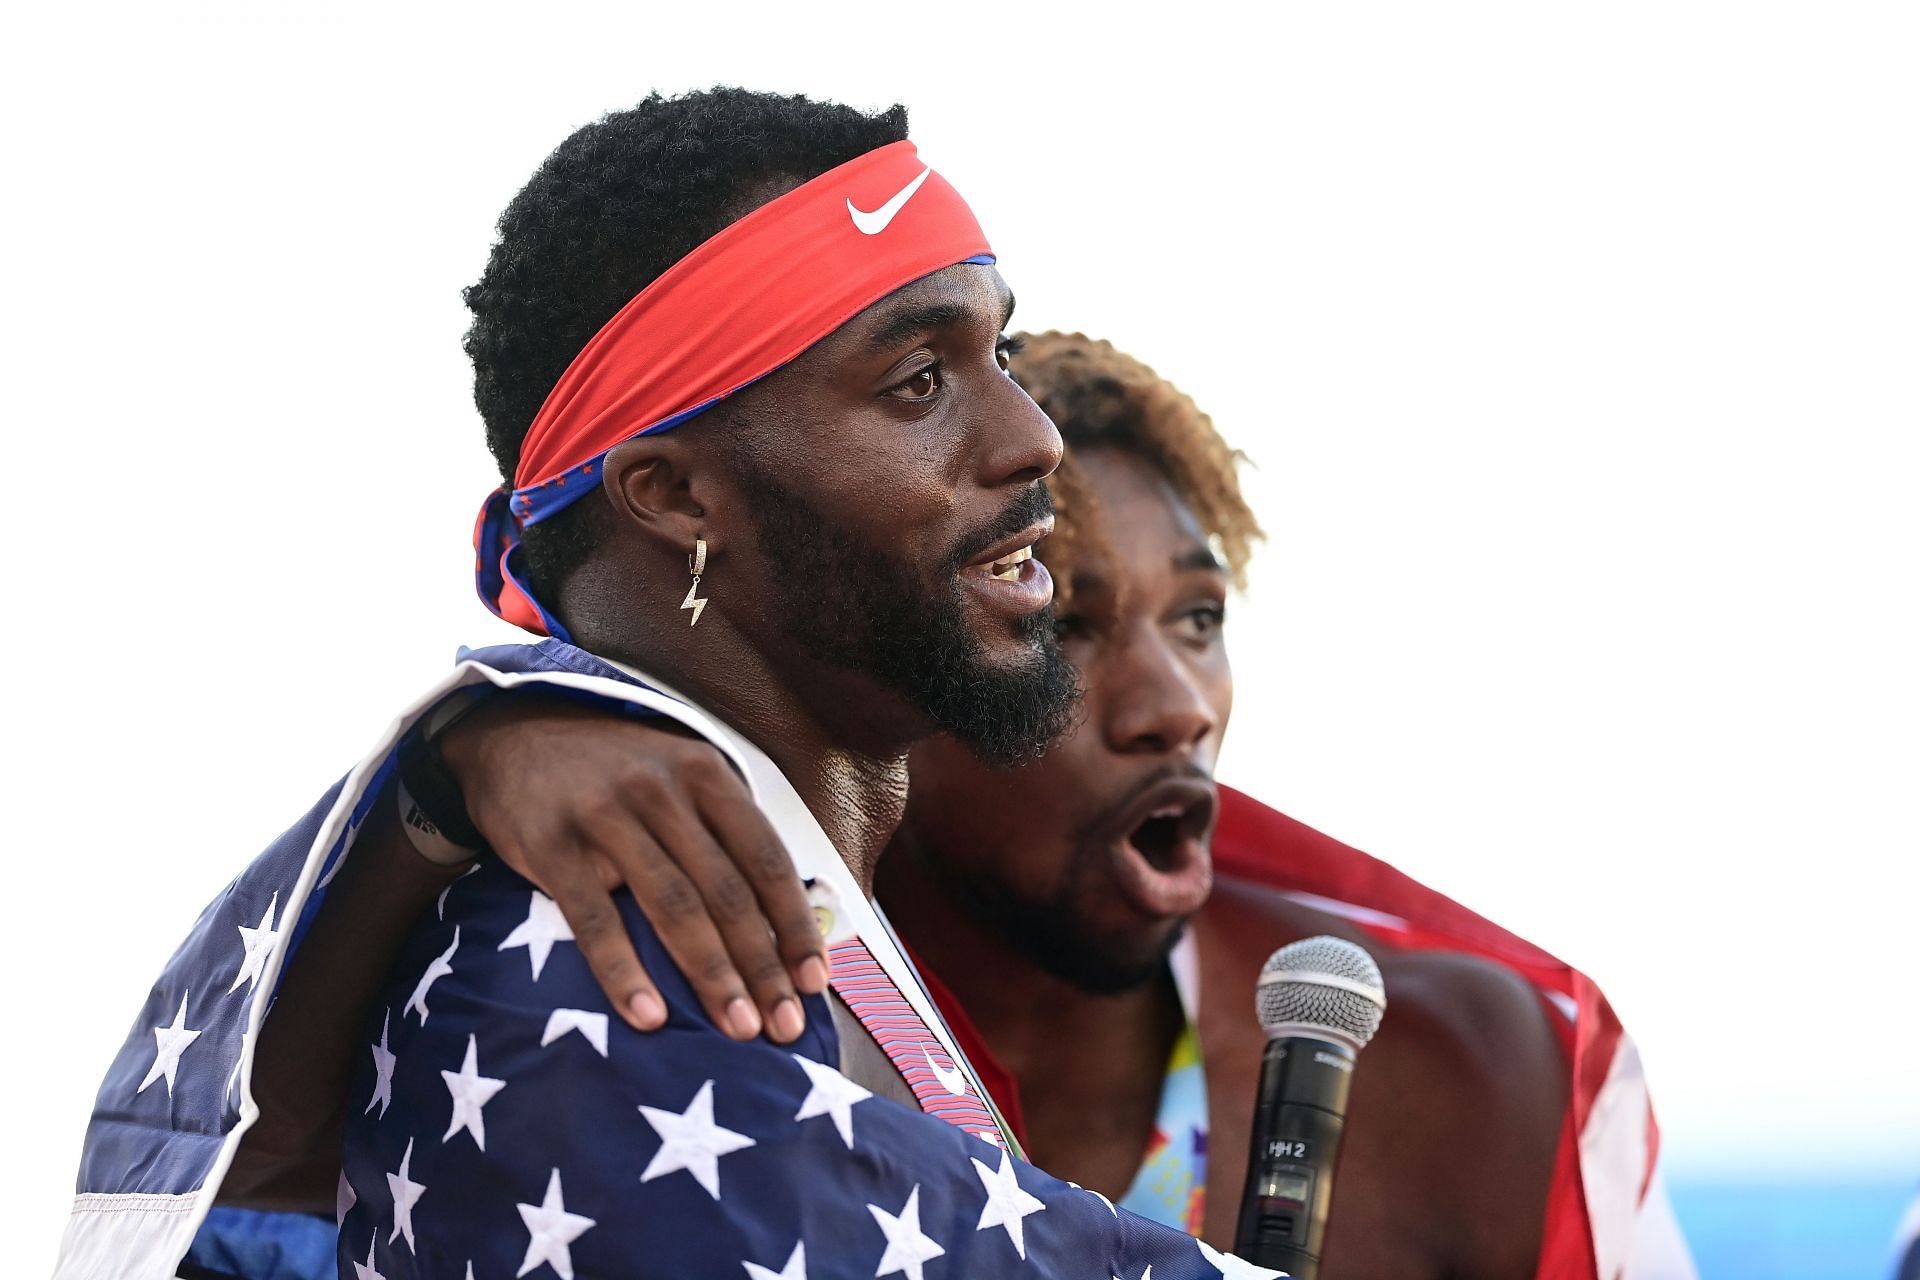 Kenneth Bednarek and Noah Lyles of Team United celebrate after competing in the Men&#039;s 200m Final at the 2022 World Athletics Championships at Hayward Field in Eugene, Oregon.